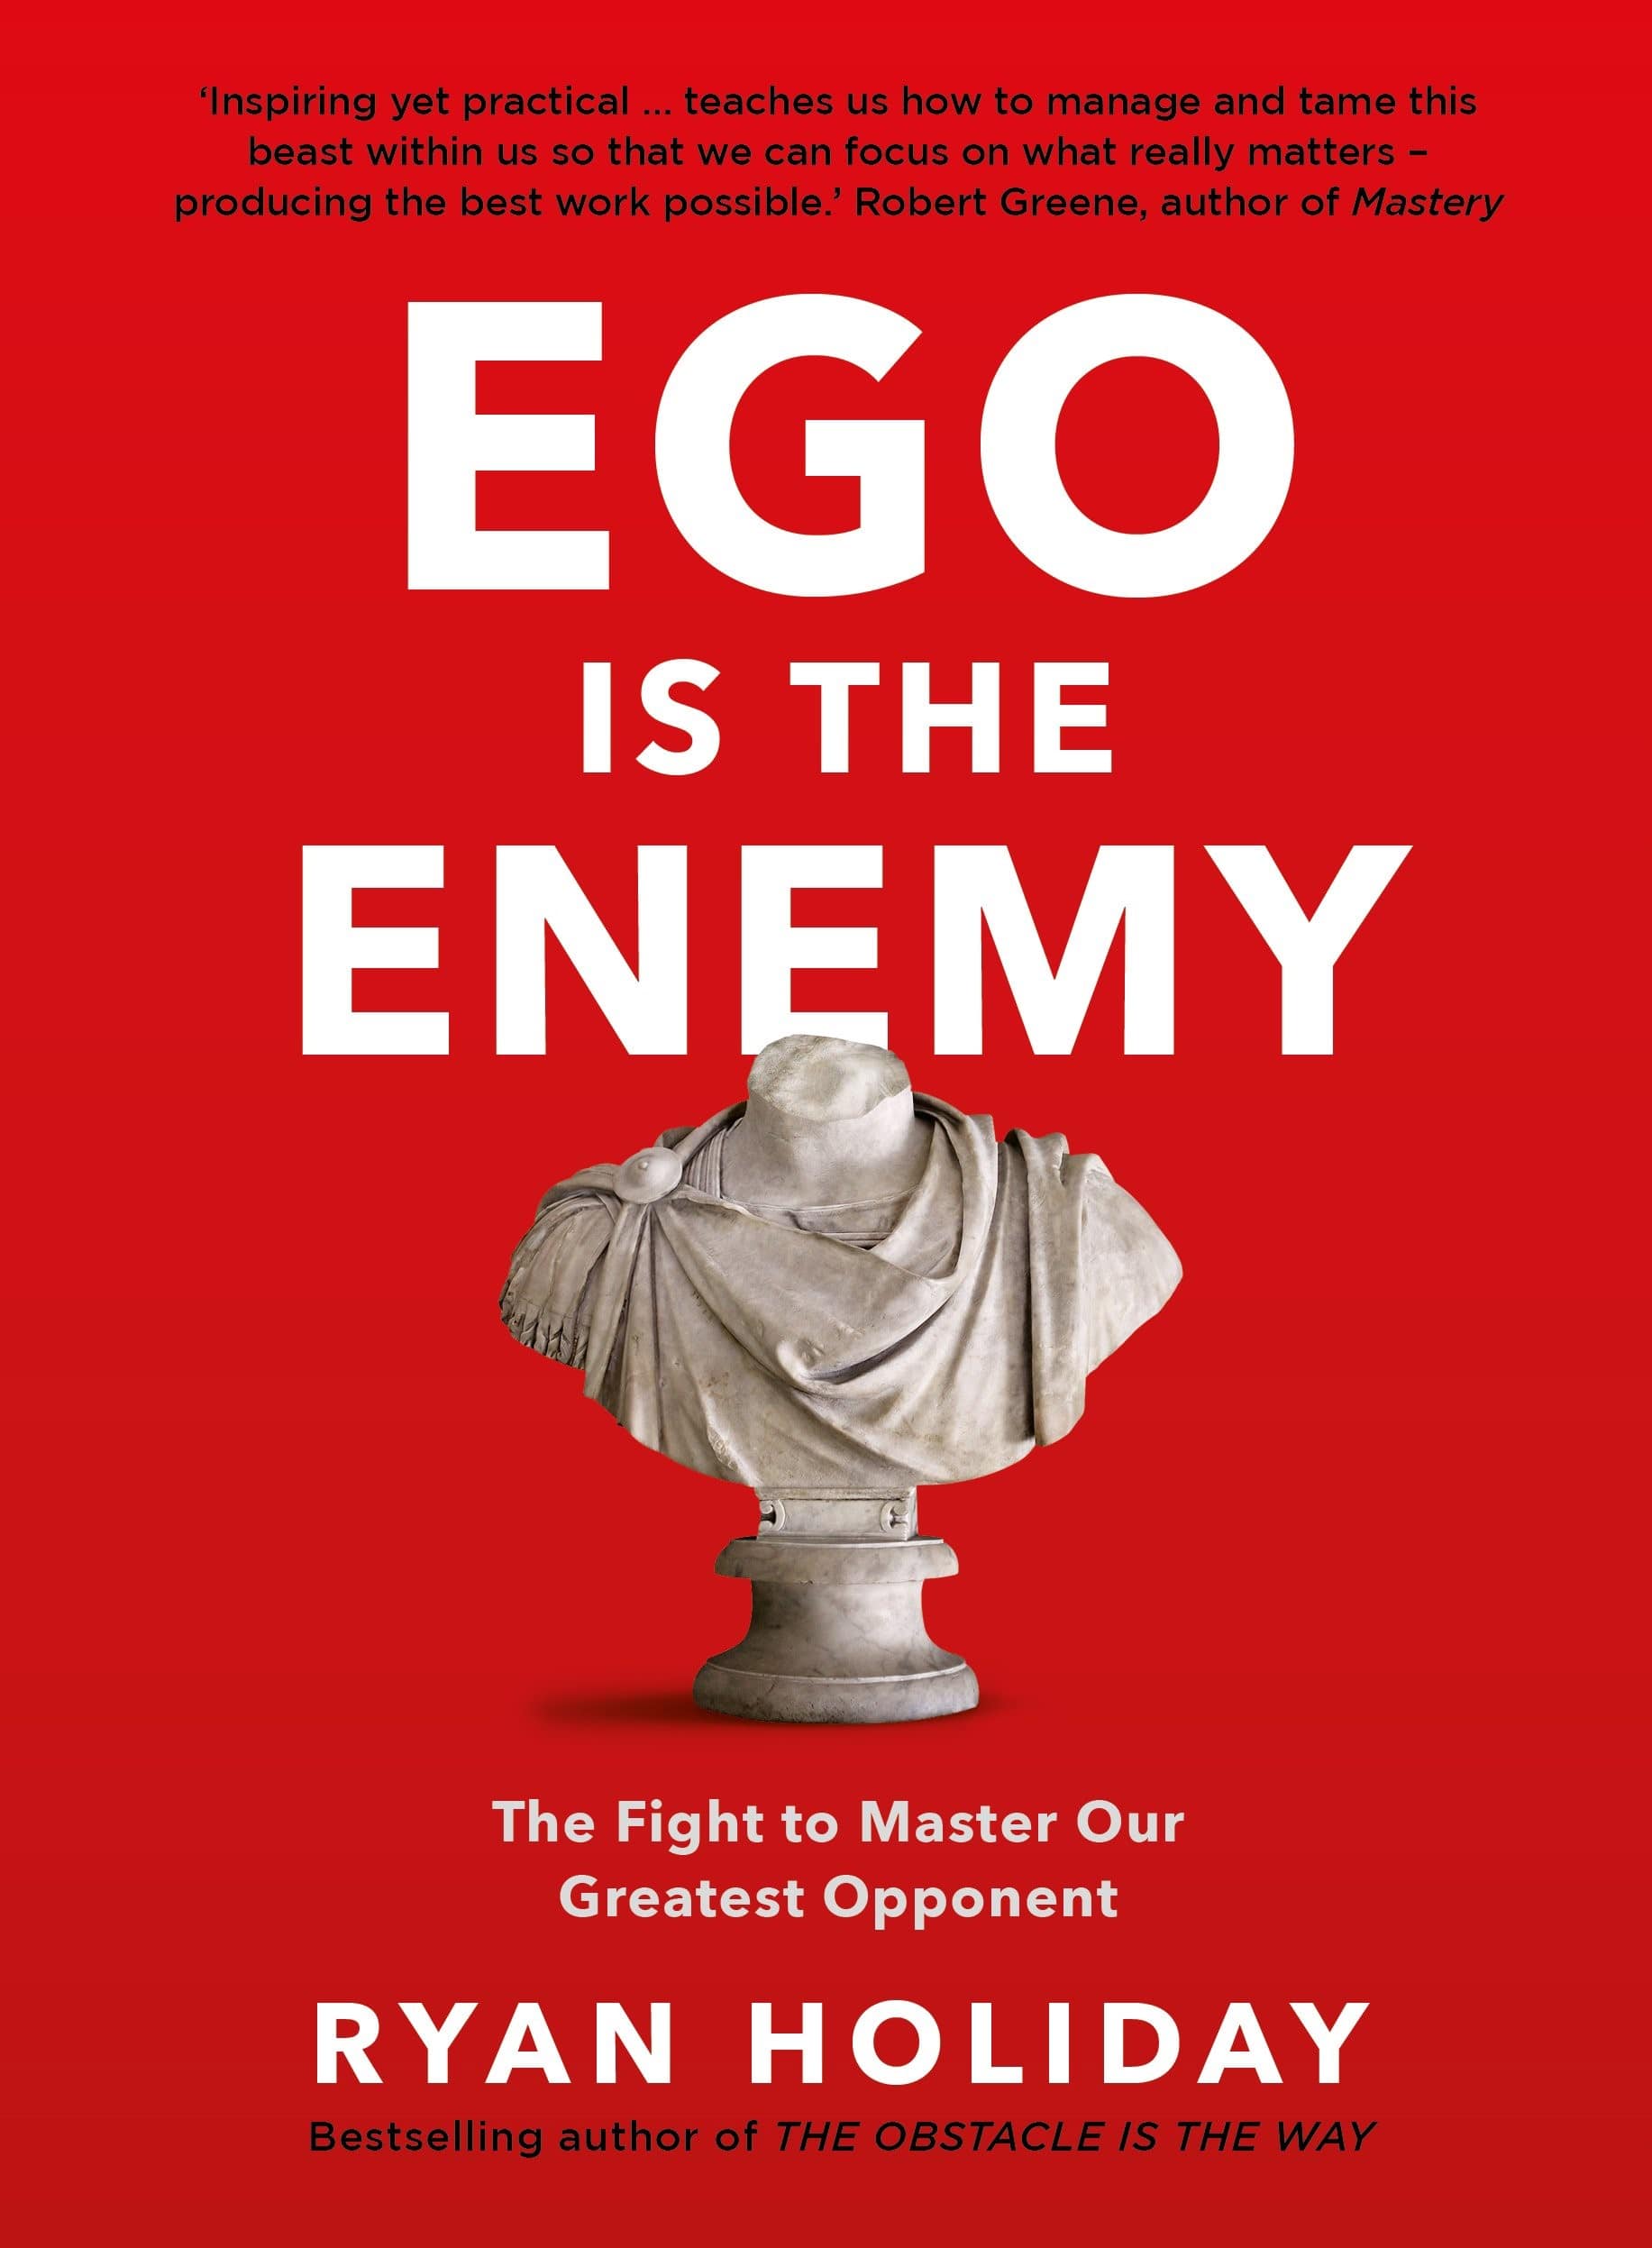 Ego Is The Enemy: An Interview With Ryan Holiday